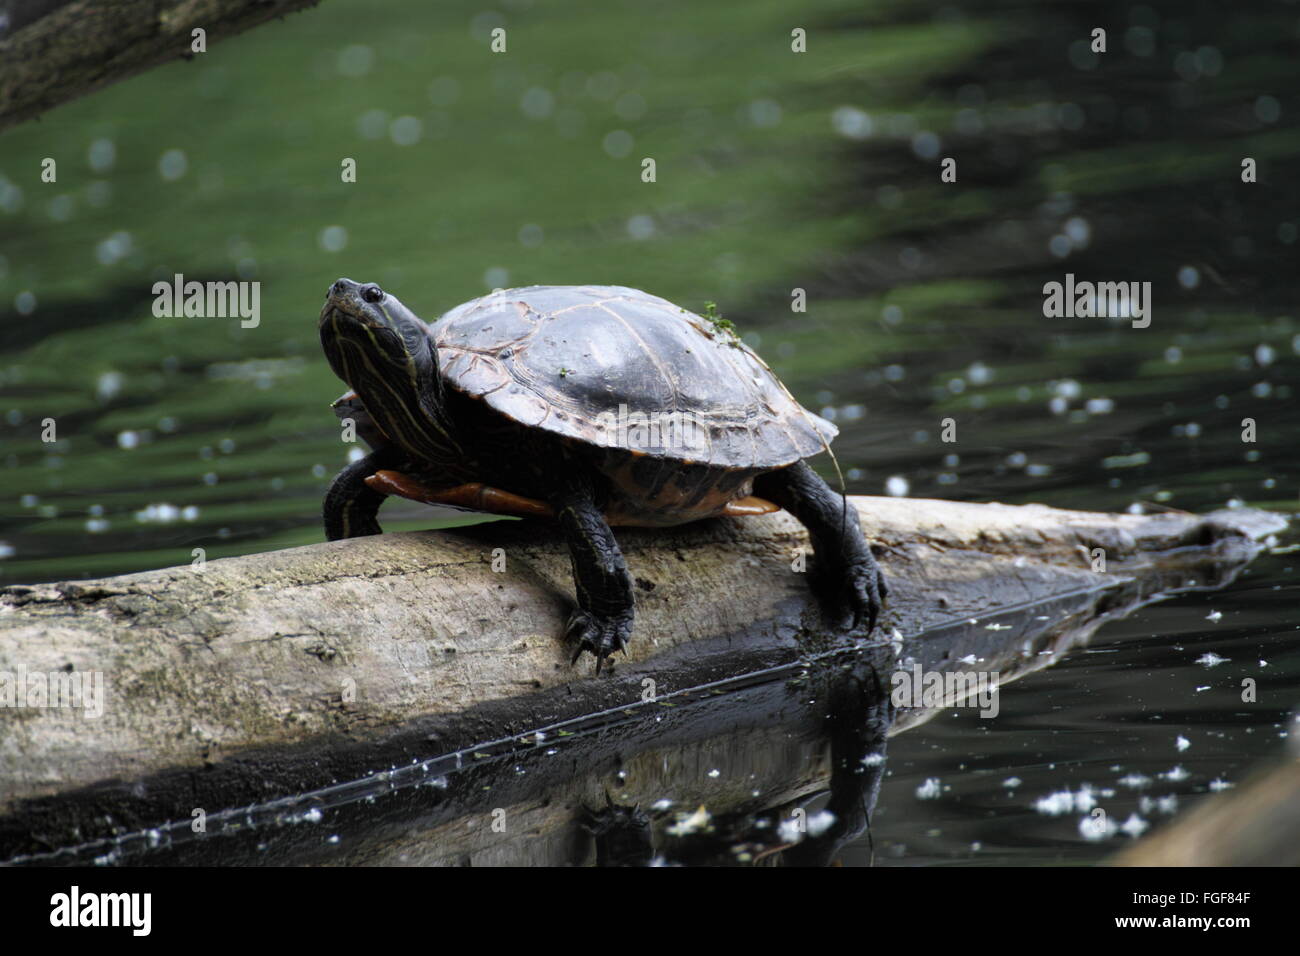 Turtle in a lake Stock Photo